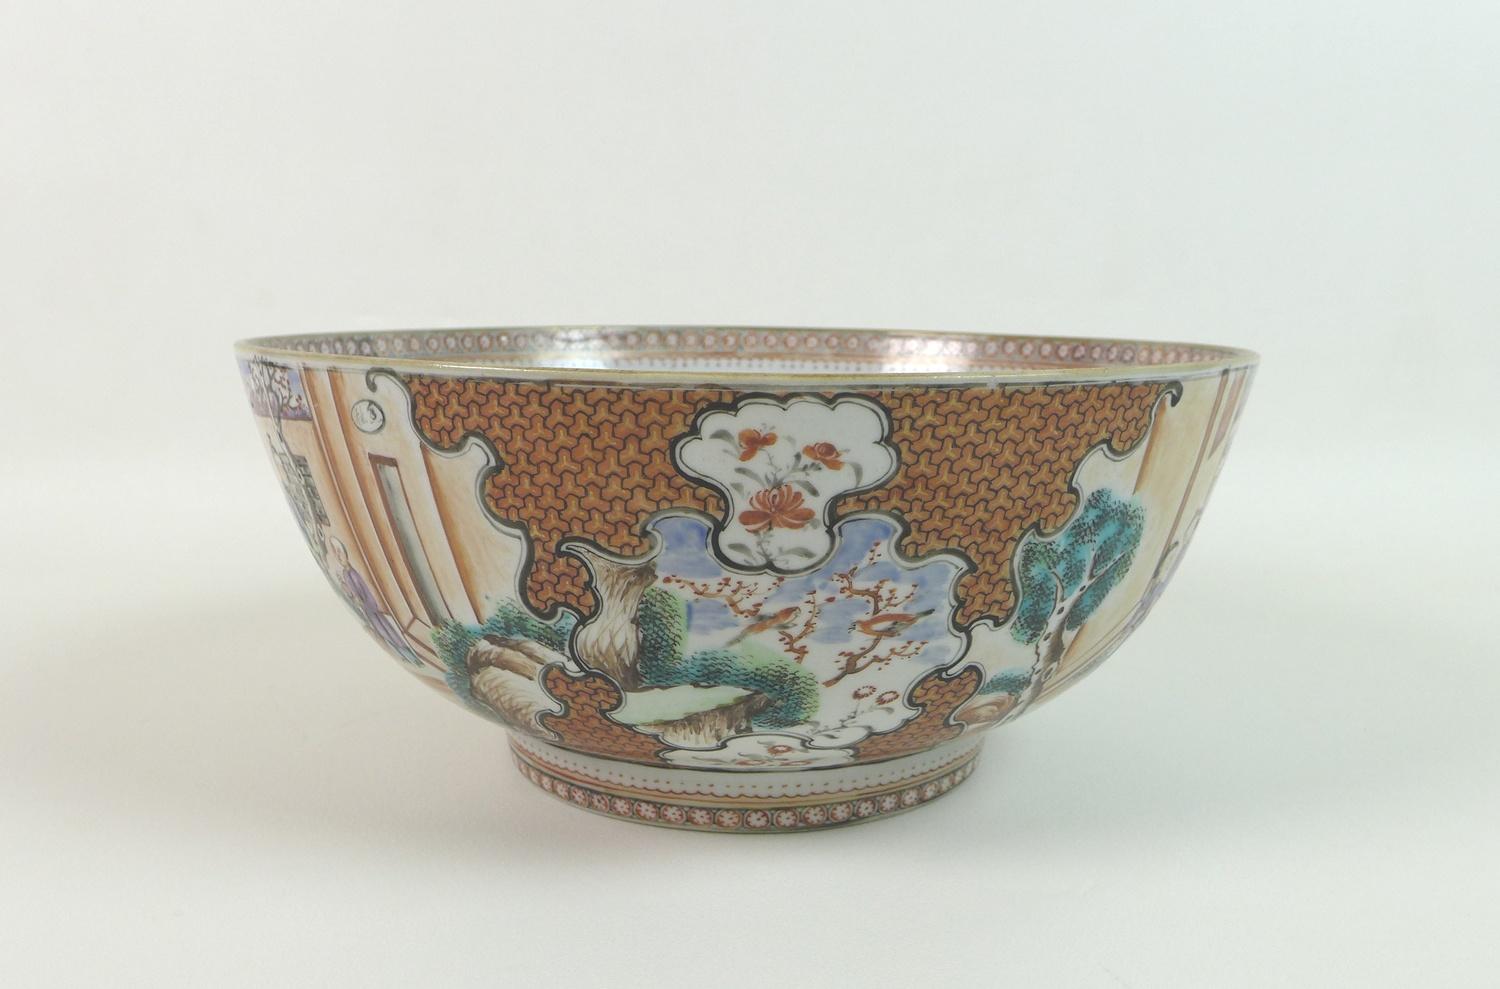 A Chinese Export porcelain famille rose punch bowl, Qing Dynasty, late 18th century, polychrome - Image 2 of 20